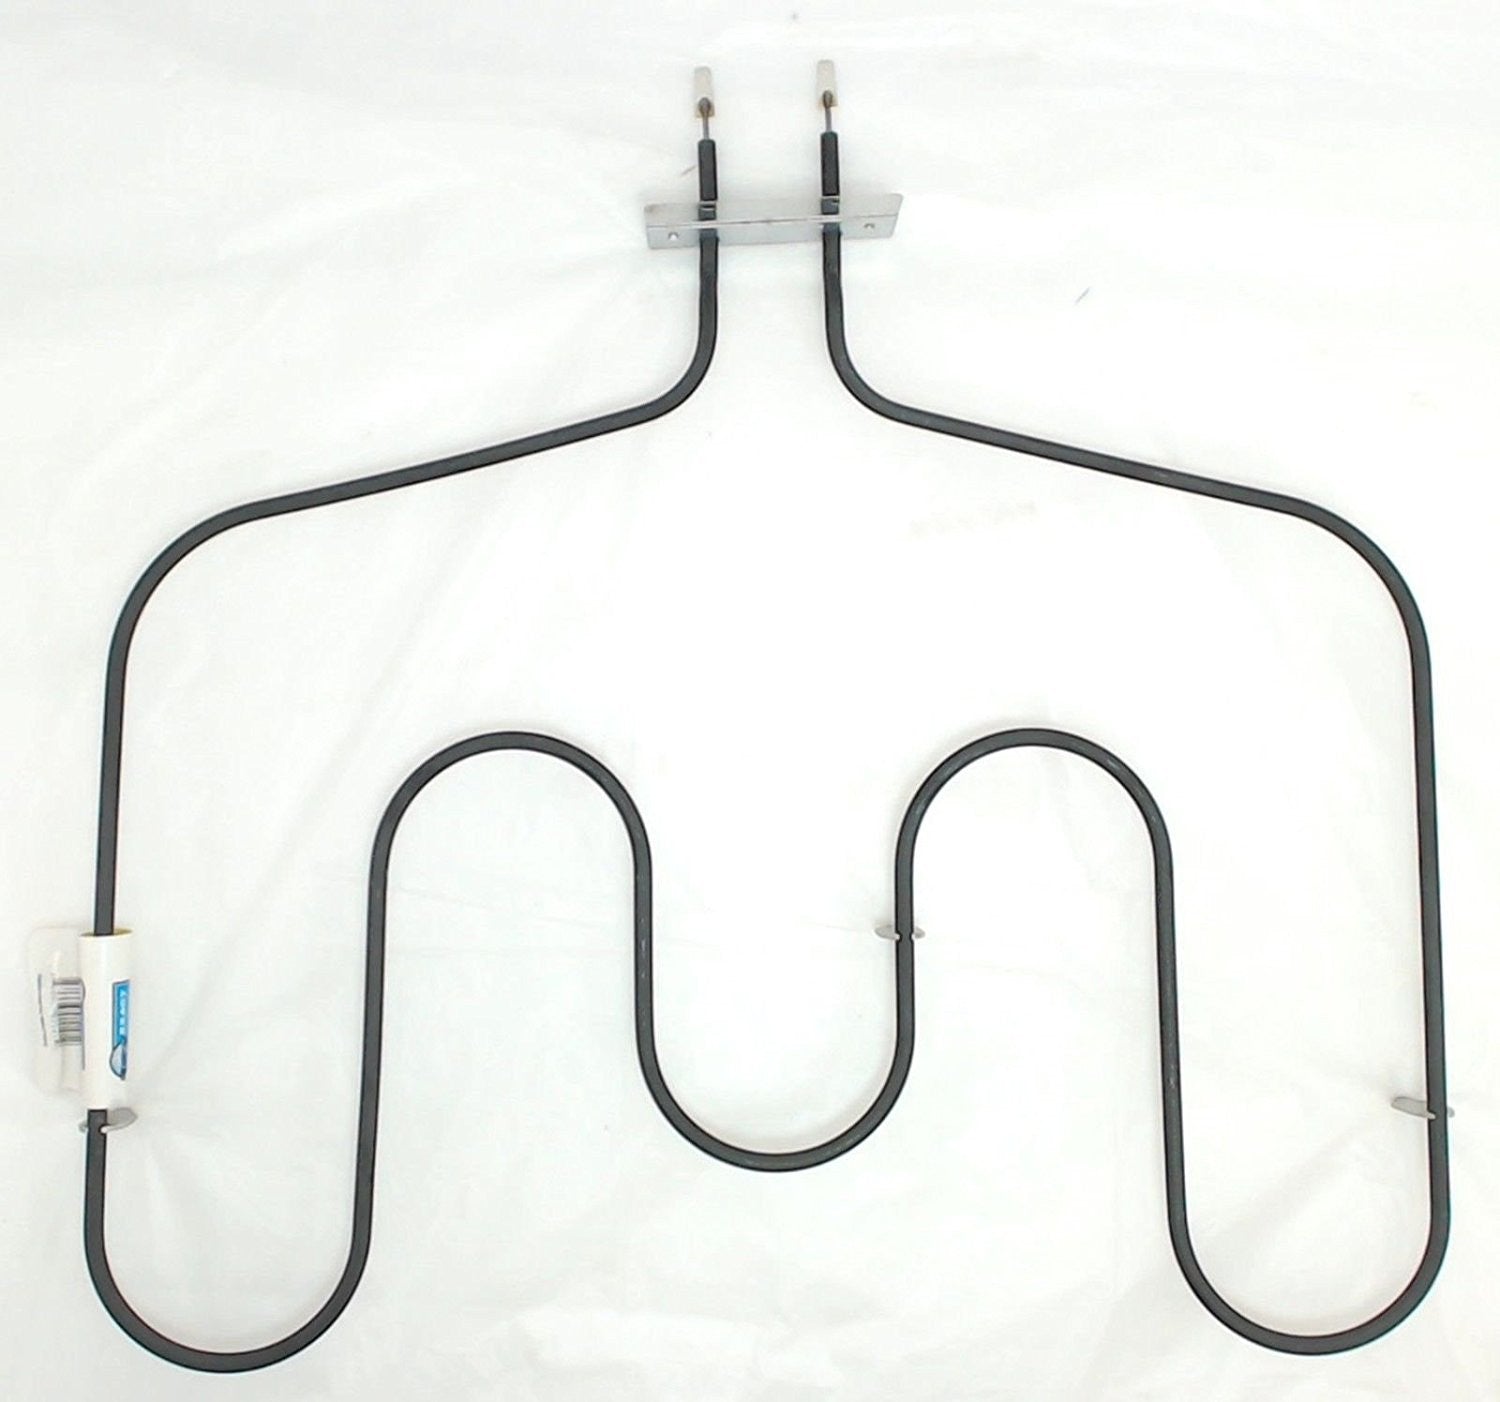 General Electric WB44T10018 Oven Bake Heating Element Replacement